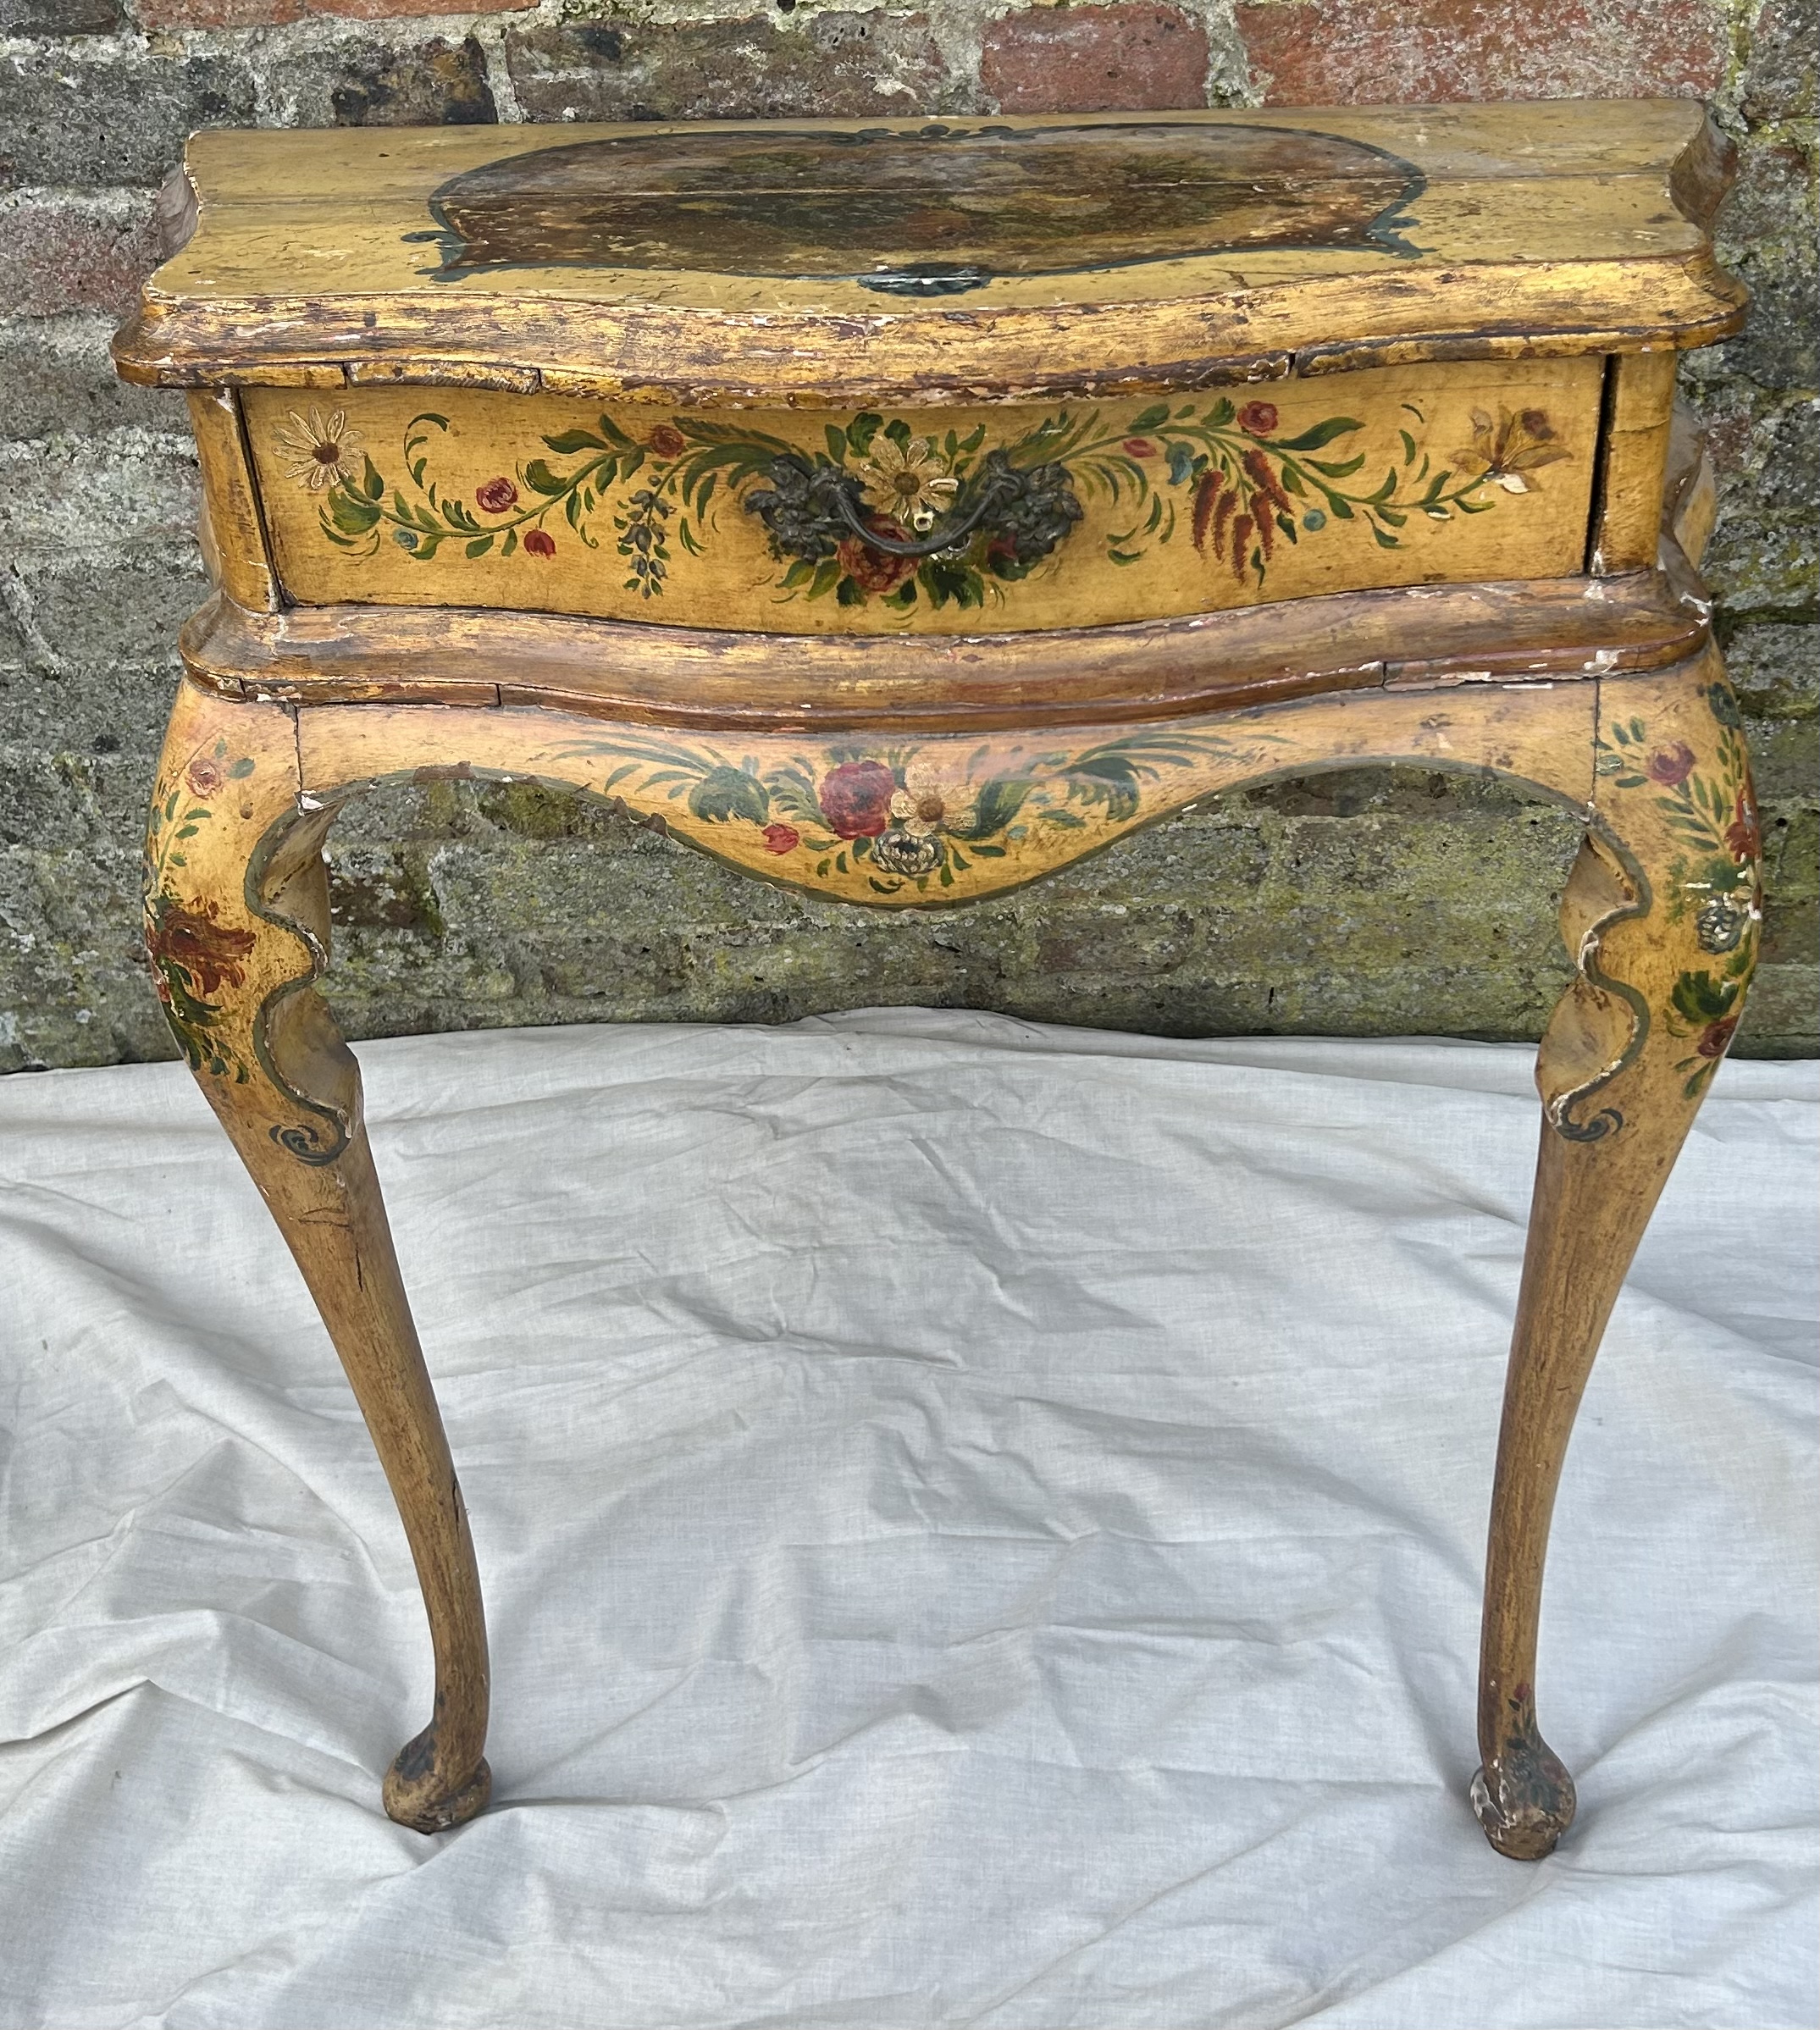 A 19th cent painted Console table